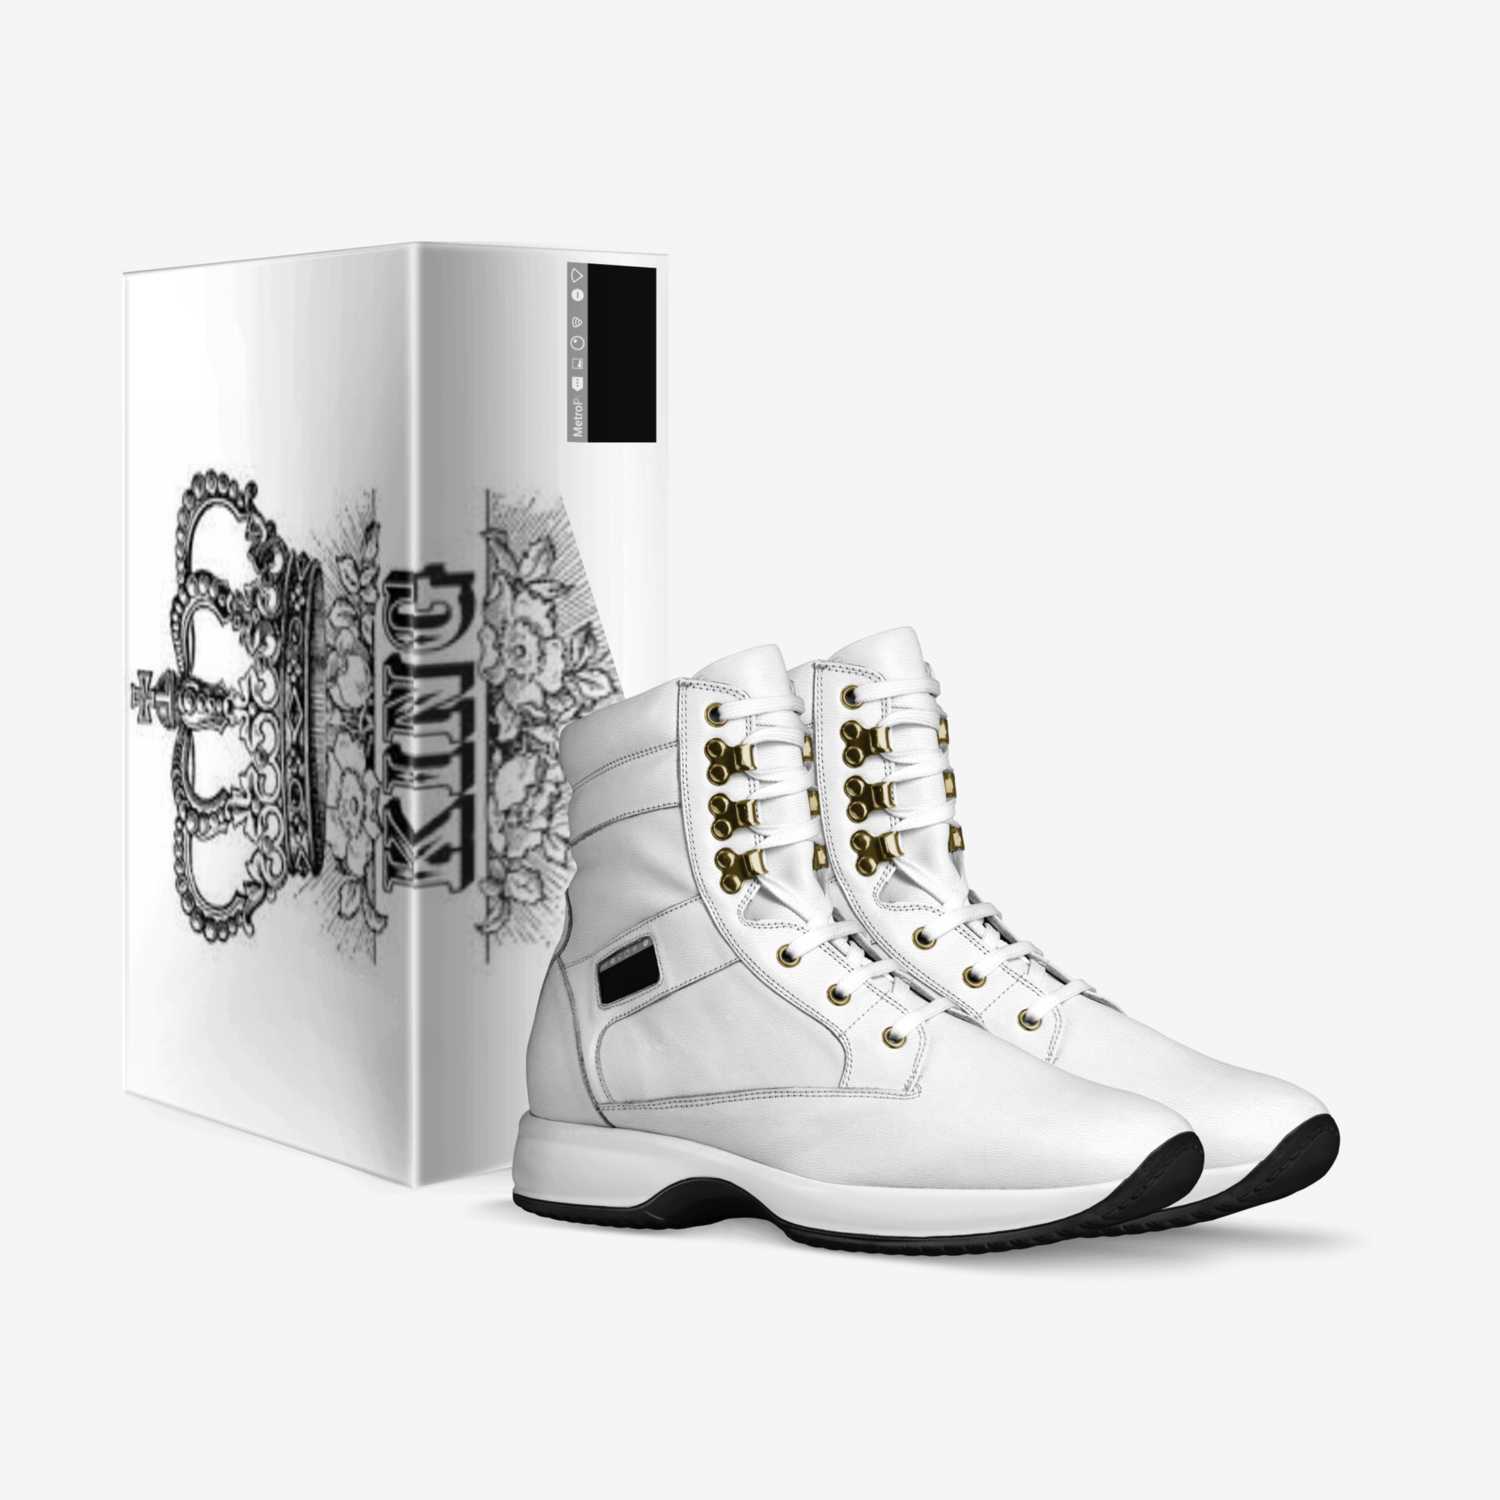 Lol custom made in Italy shoes by Gerry | Box view